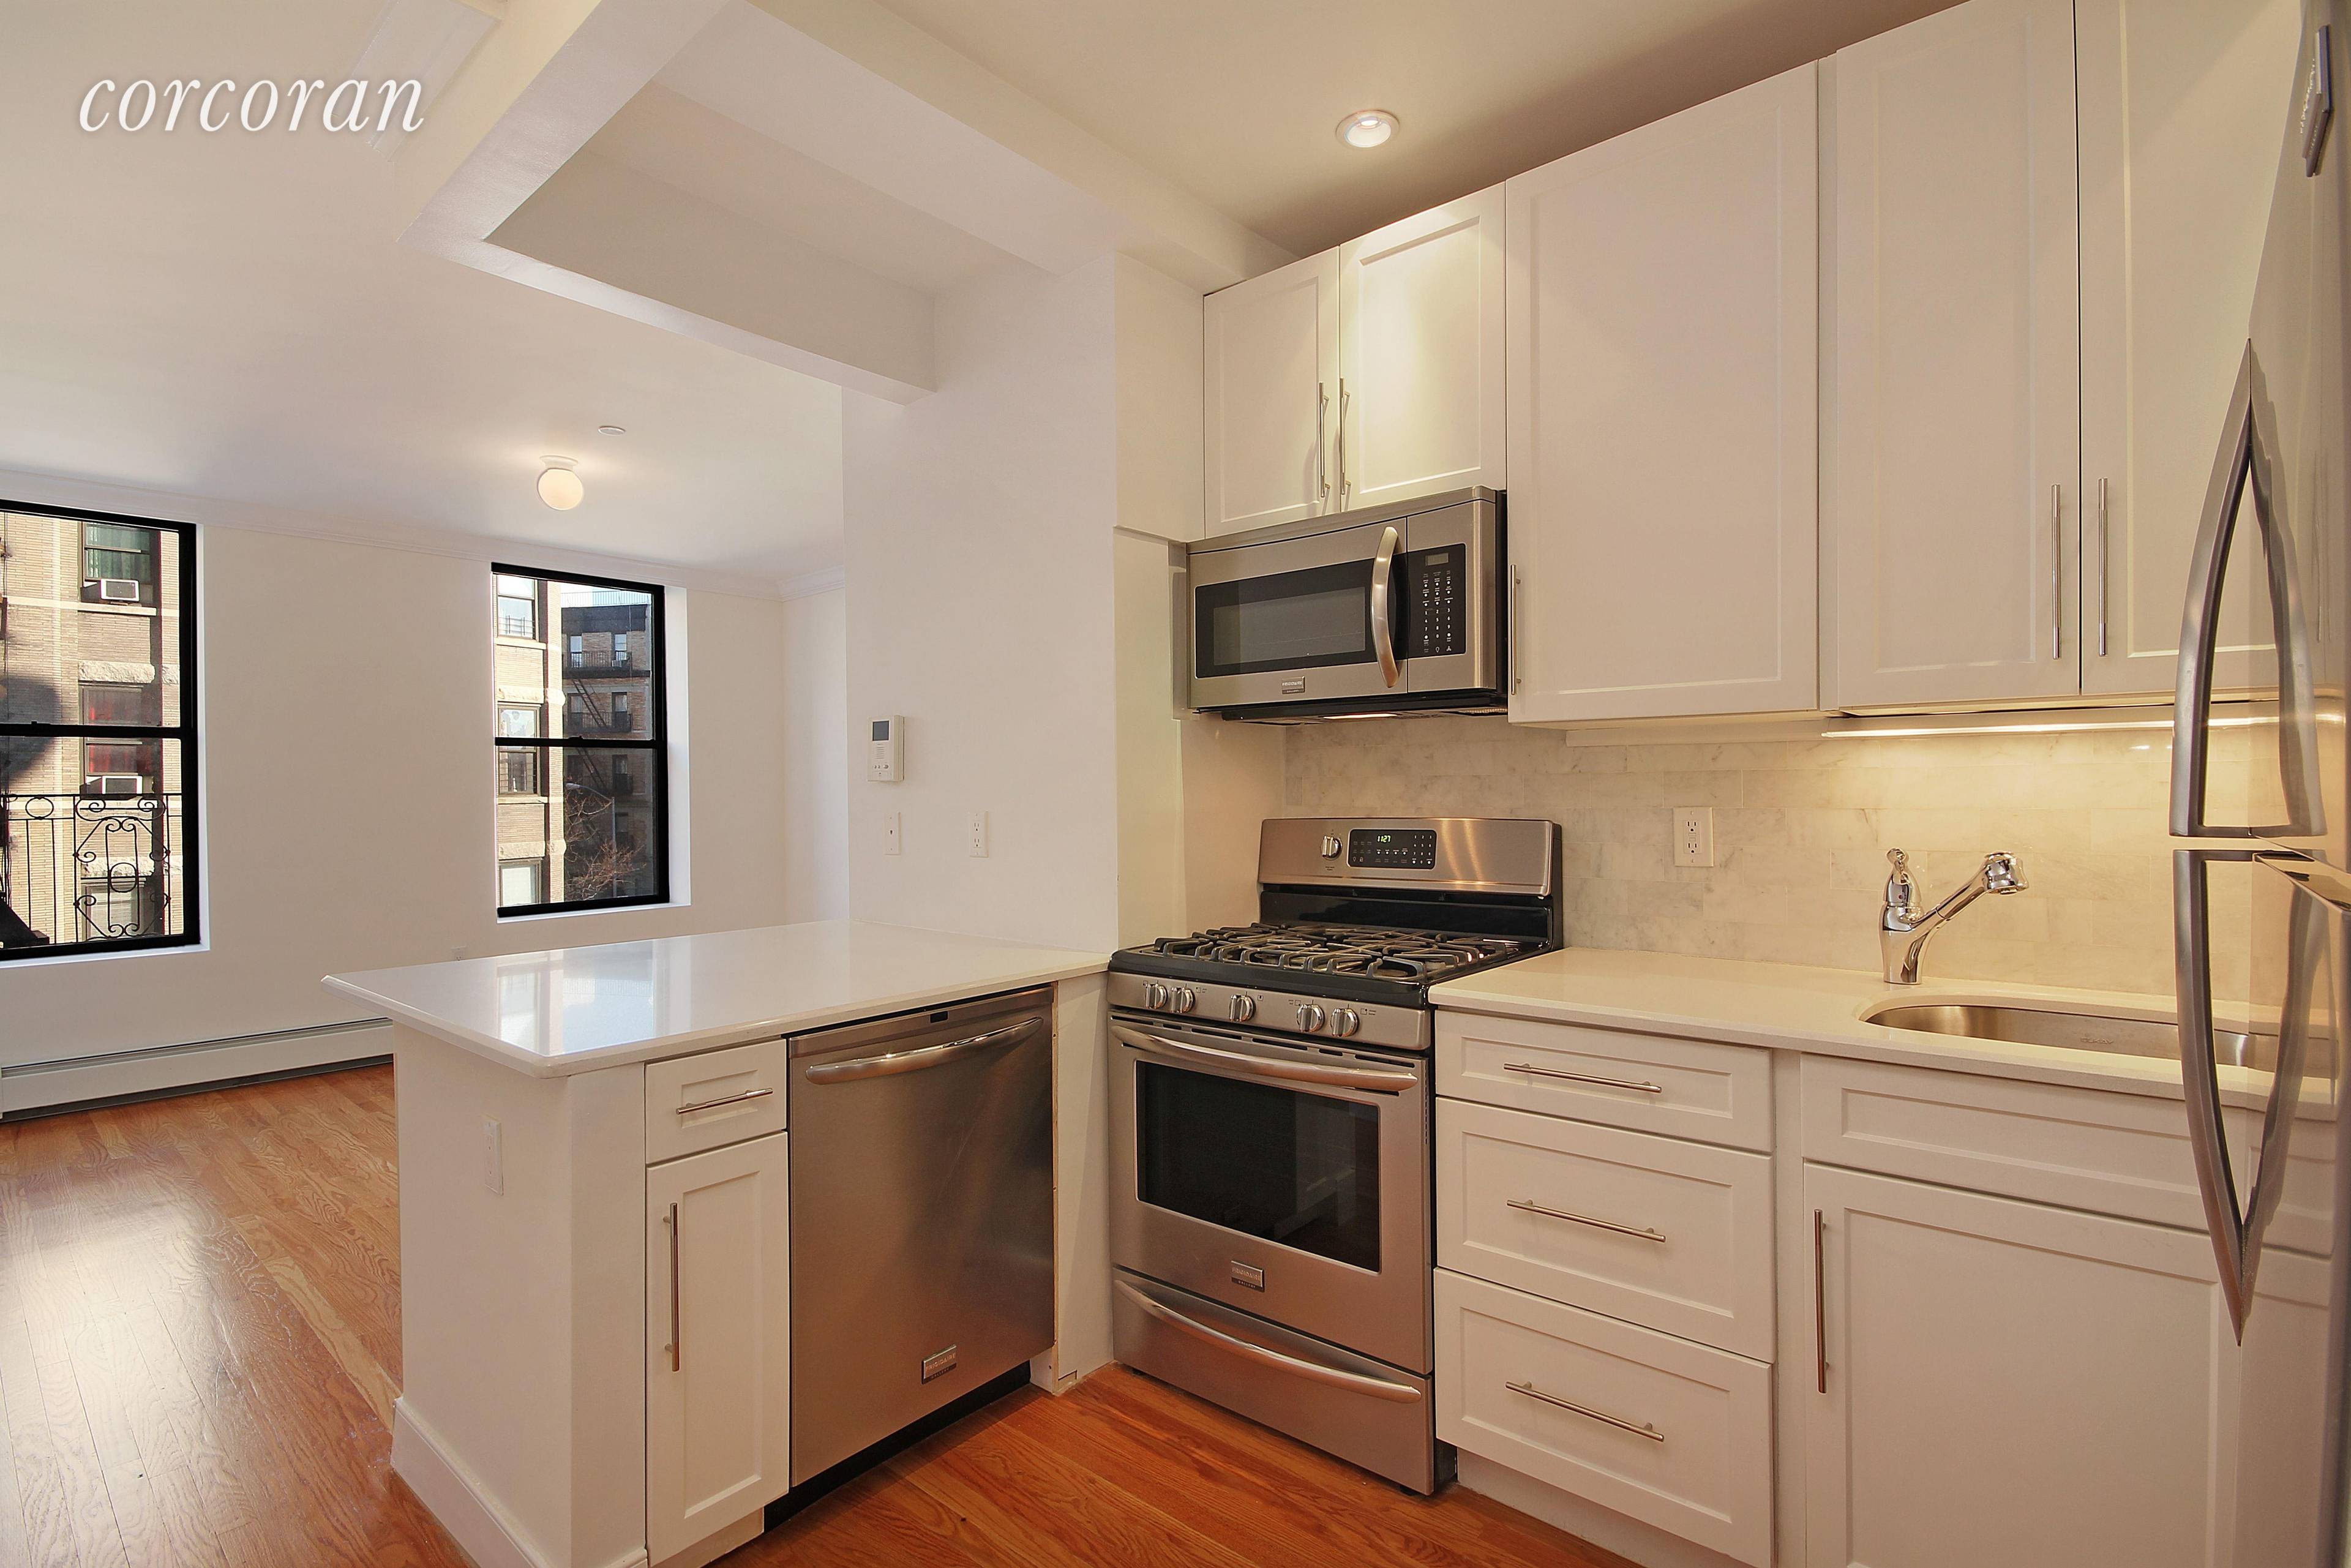 New Luxury Renovation ! This beautiful 3 bedroom 2 full bath home is located next door to Central Park and smack in the middle of popular South Harlem full of ...